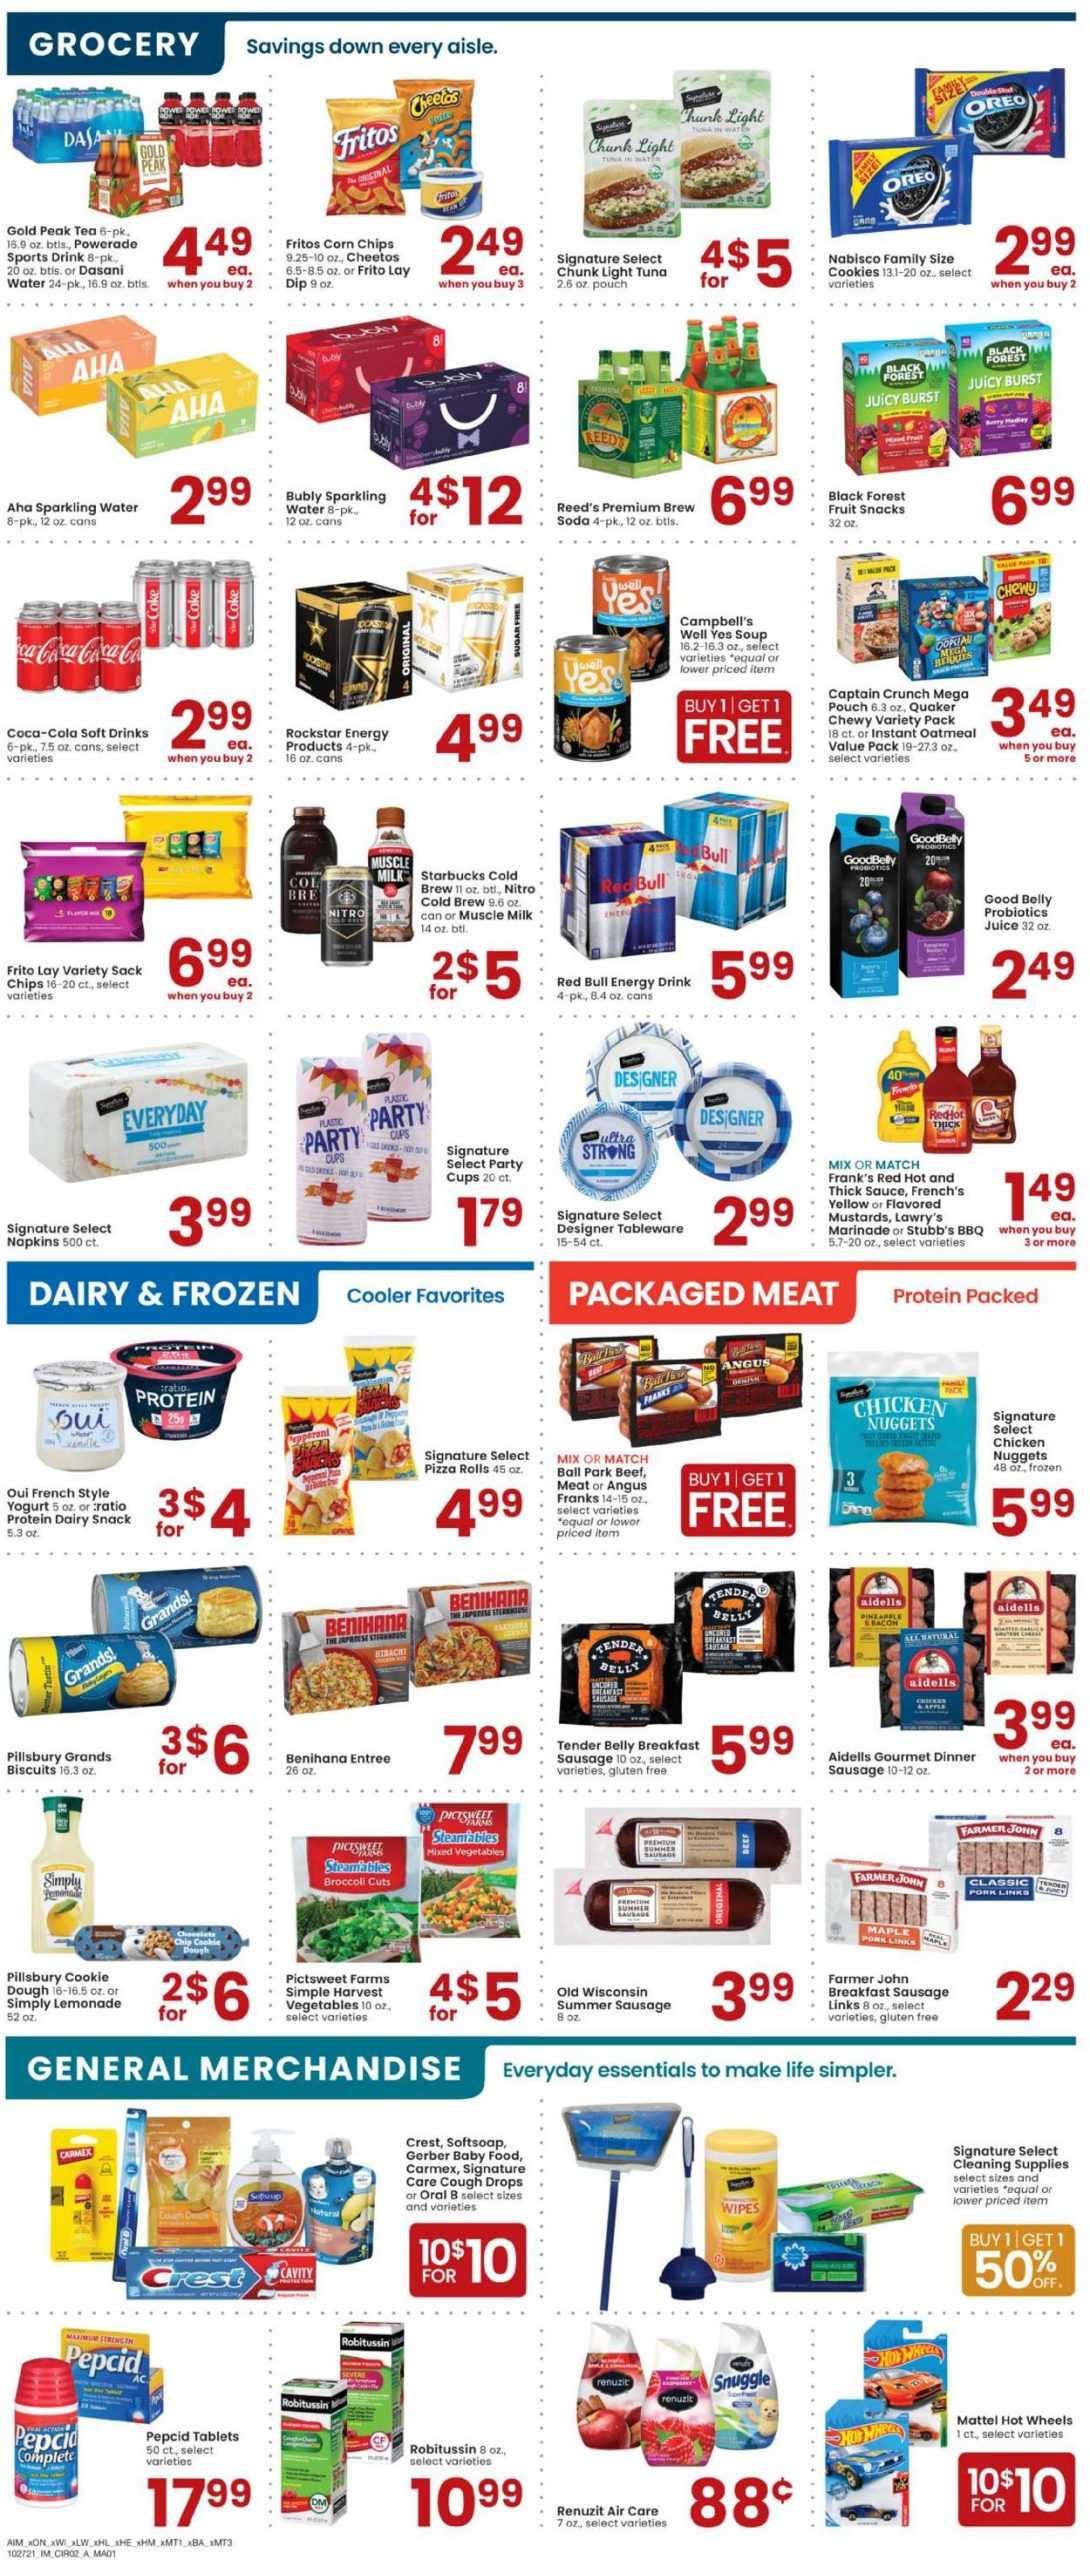 Albertsons Weekly Ad February 23 - March 1, 2022 Just For U